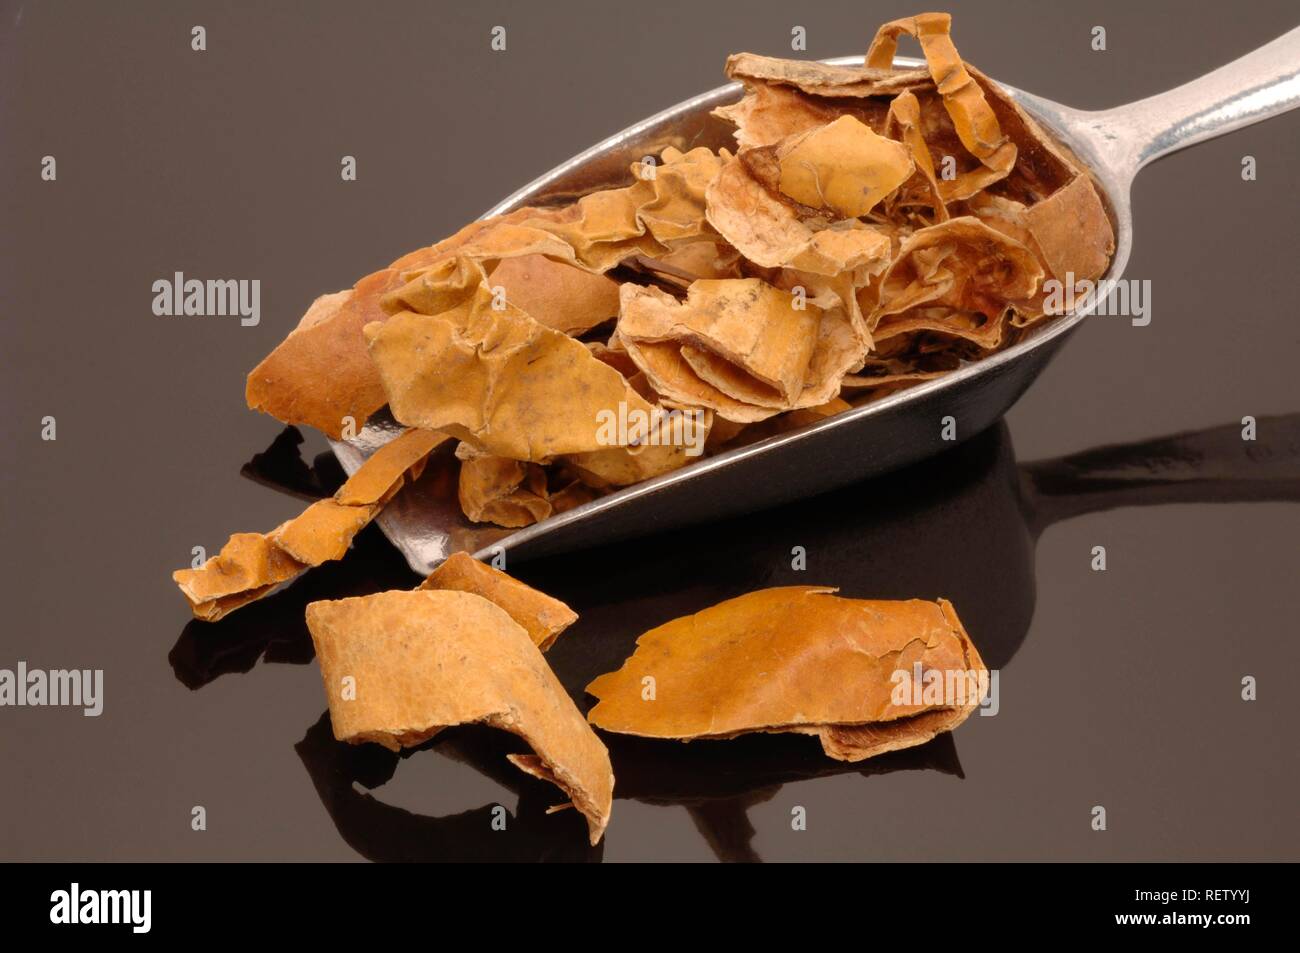 Dried Gualou shells (Trichosanthes), used in traditional Chinese medicine Stock Photo